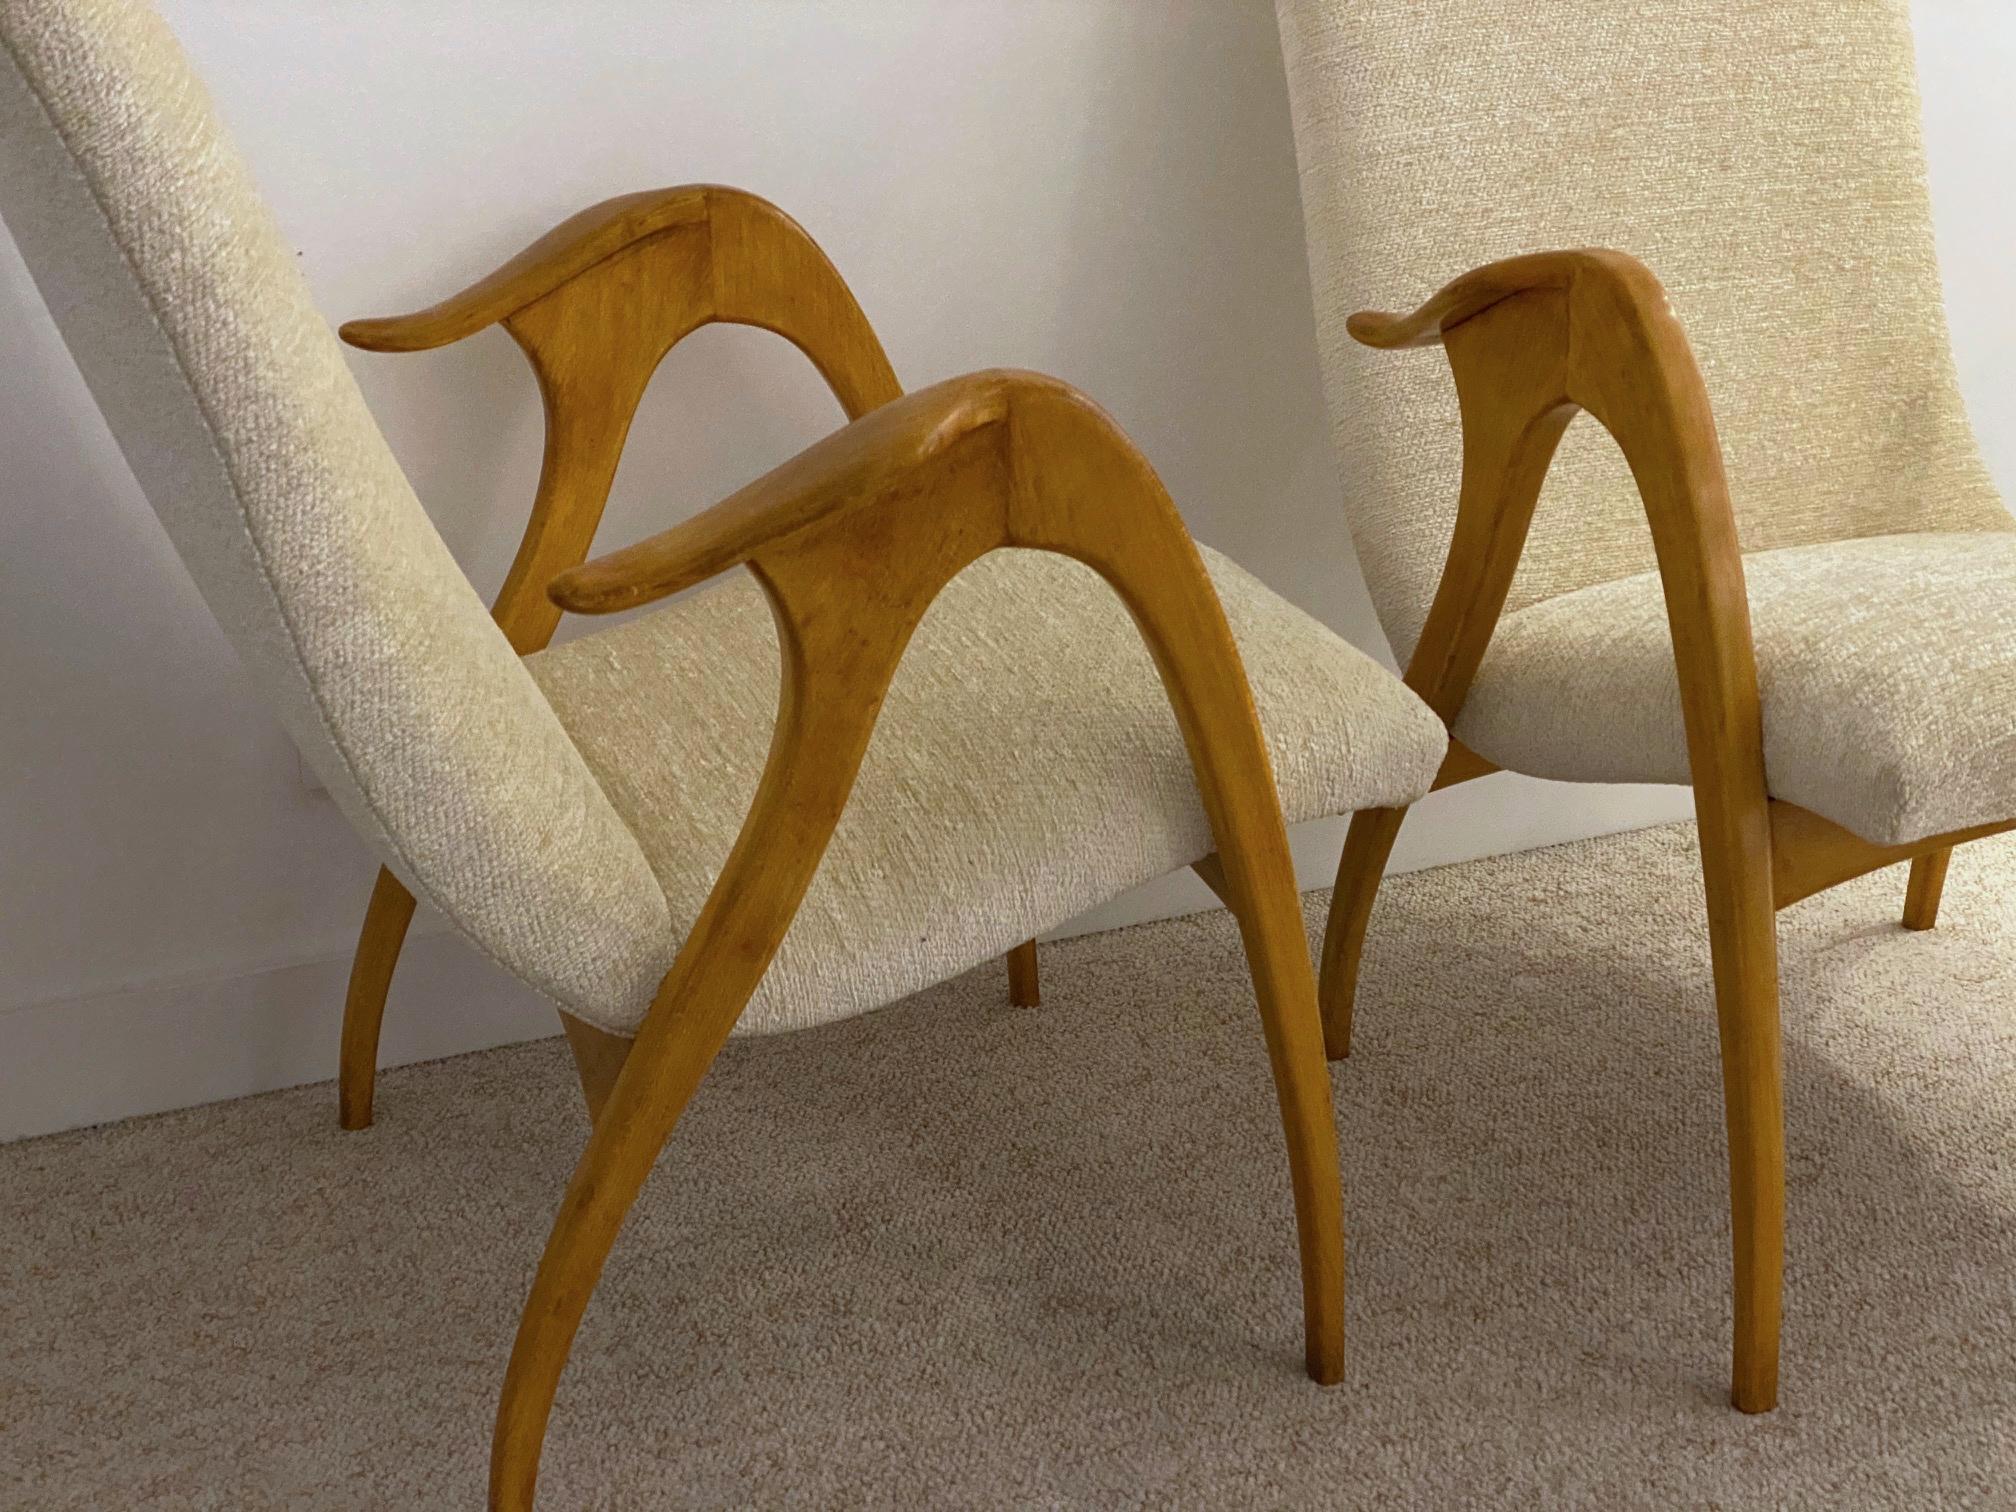 Italian Design Pair of Maple Wood Chairs by Malatesta and Masson, Italy, 1950s 4